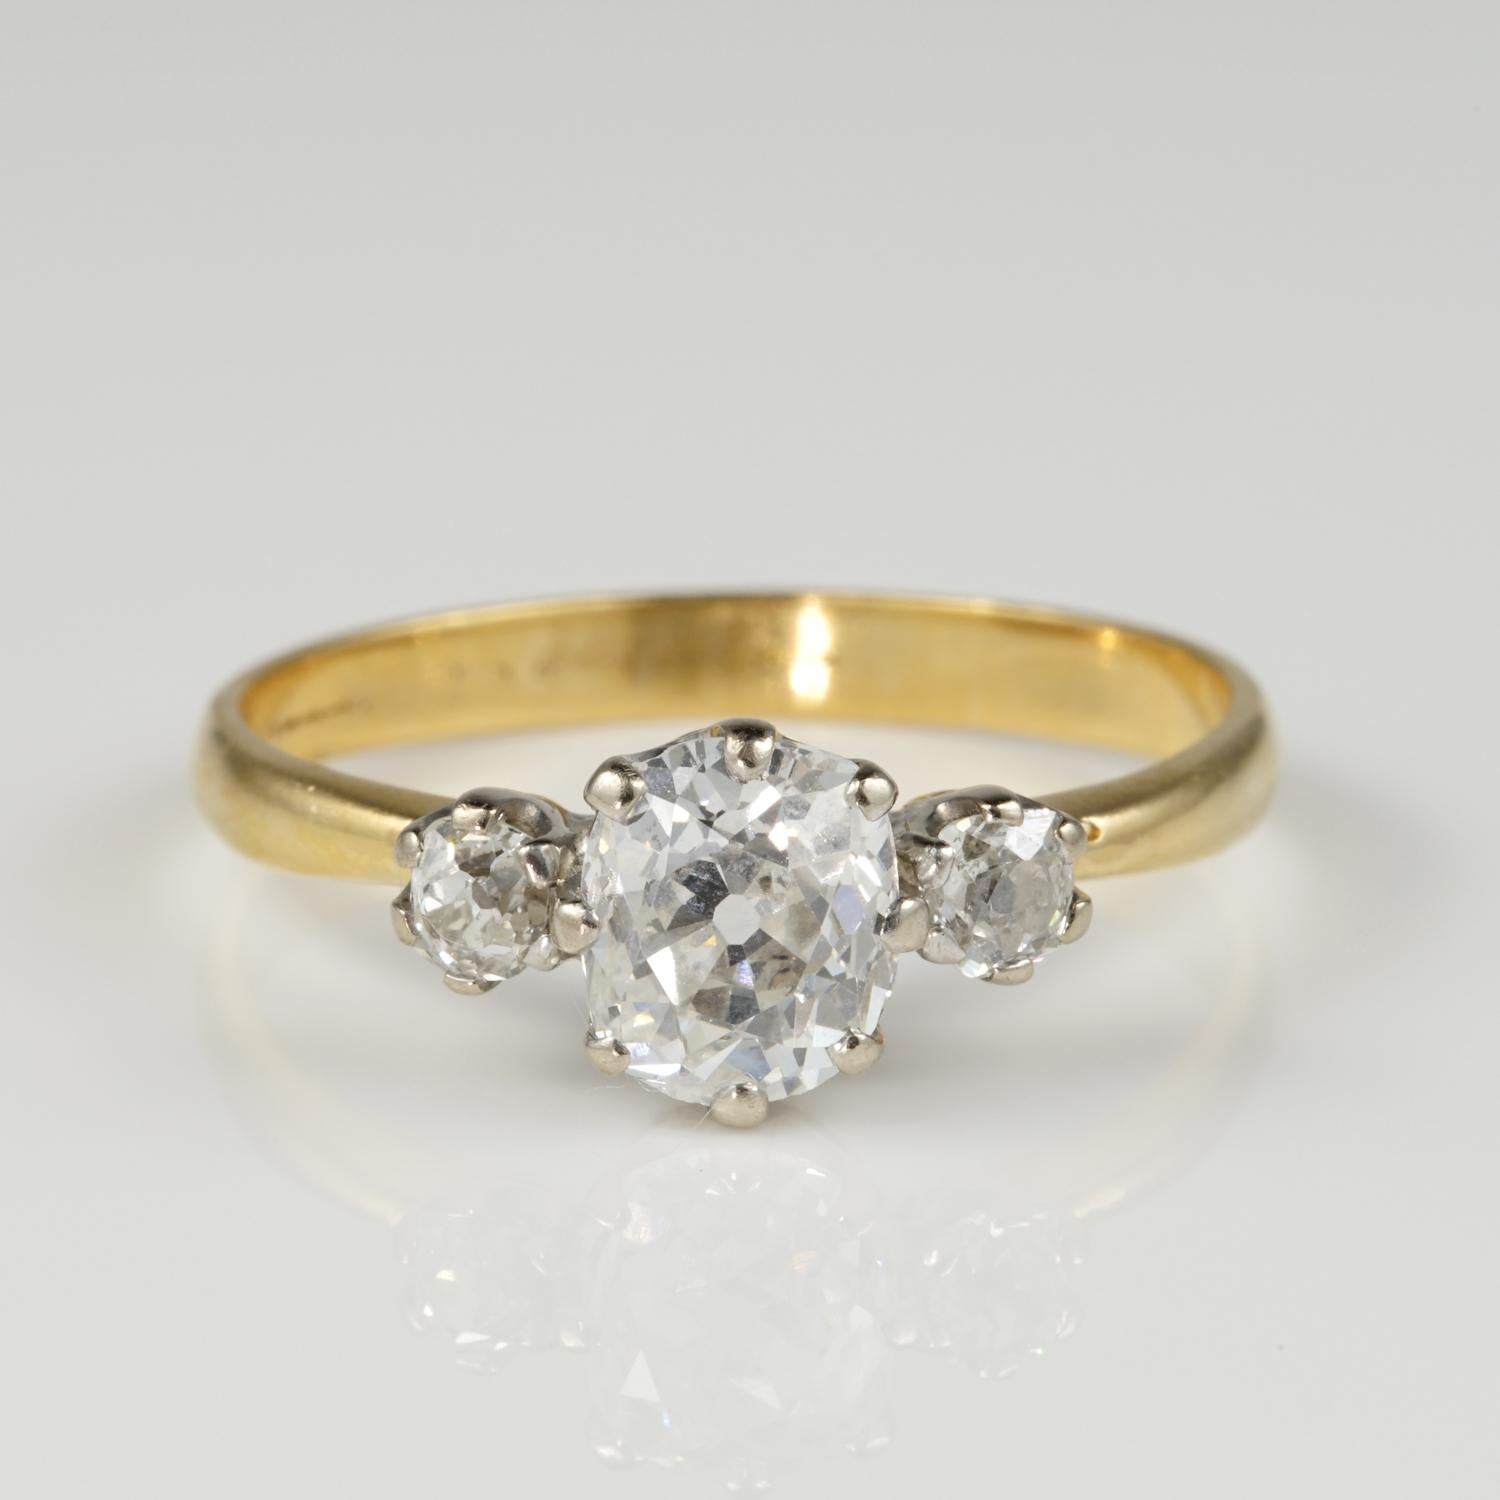 An authentic Victorian very well preserved, untouched condition; with a delightful essential mounting made of solid 18 KT gold and platinum prong work

Boasting a magnificent old mine cut Diamond of very good proportions, full of the amazing sparkle